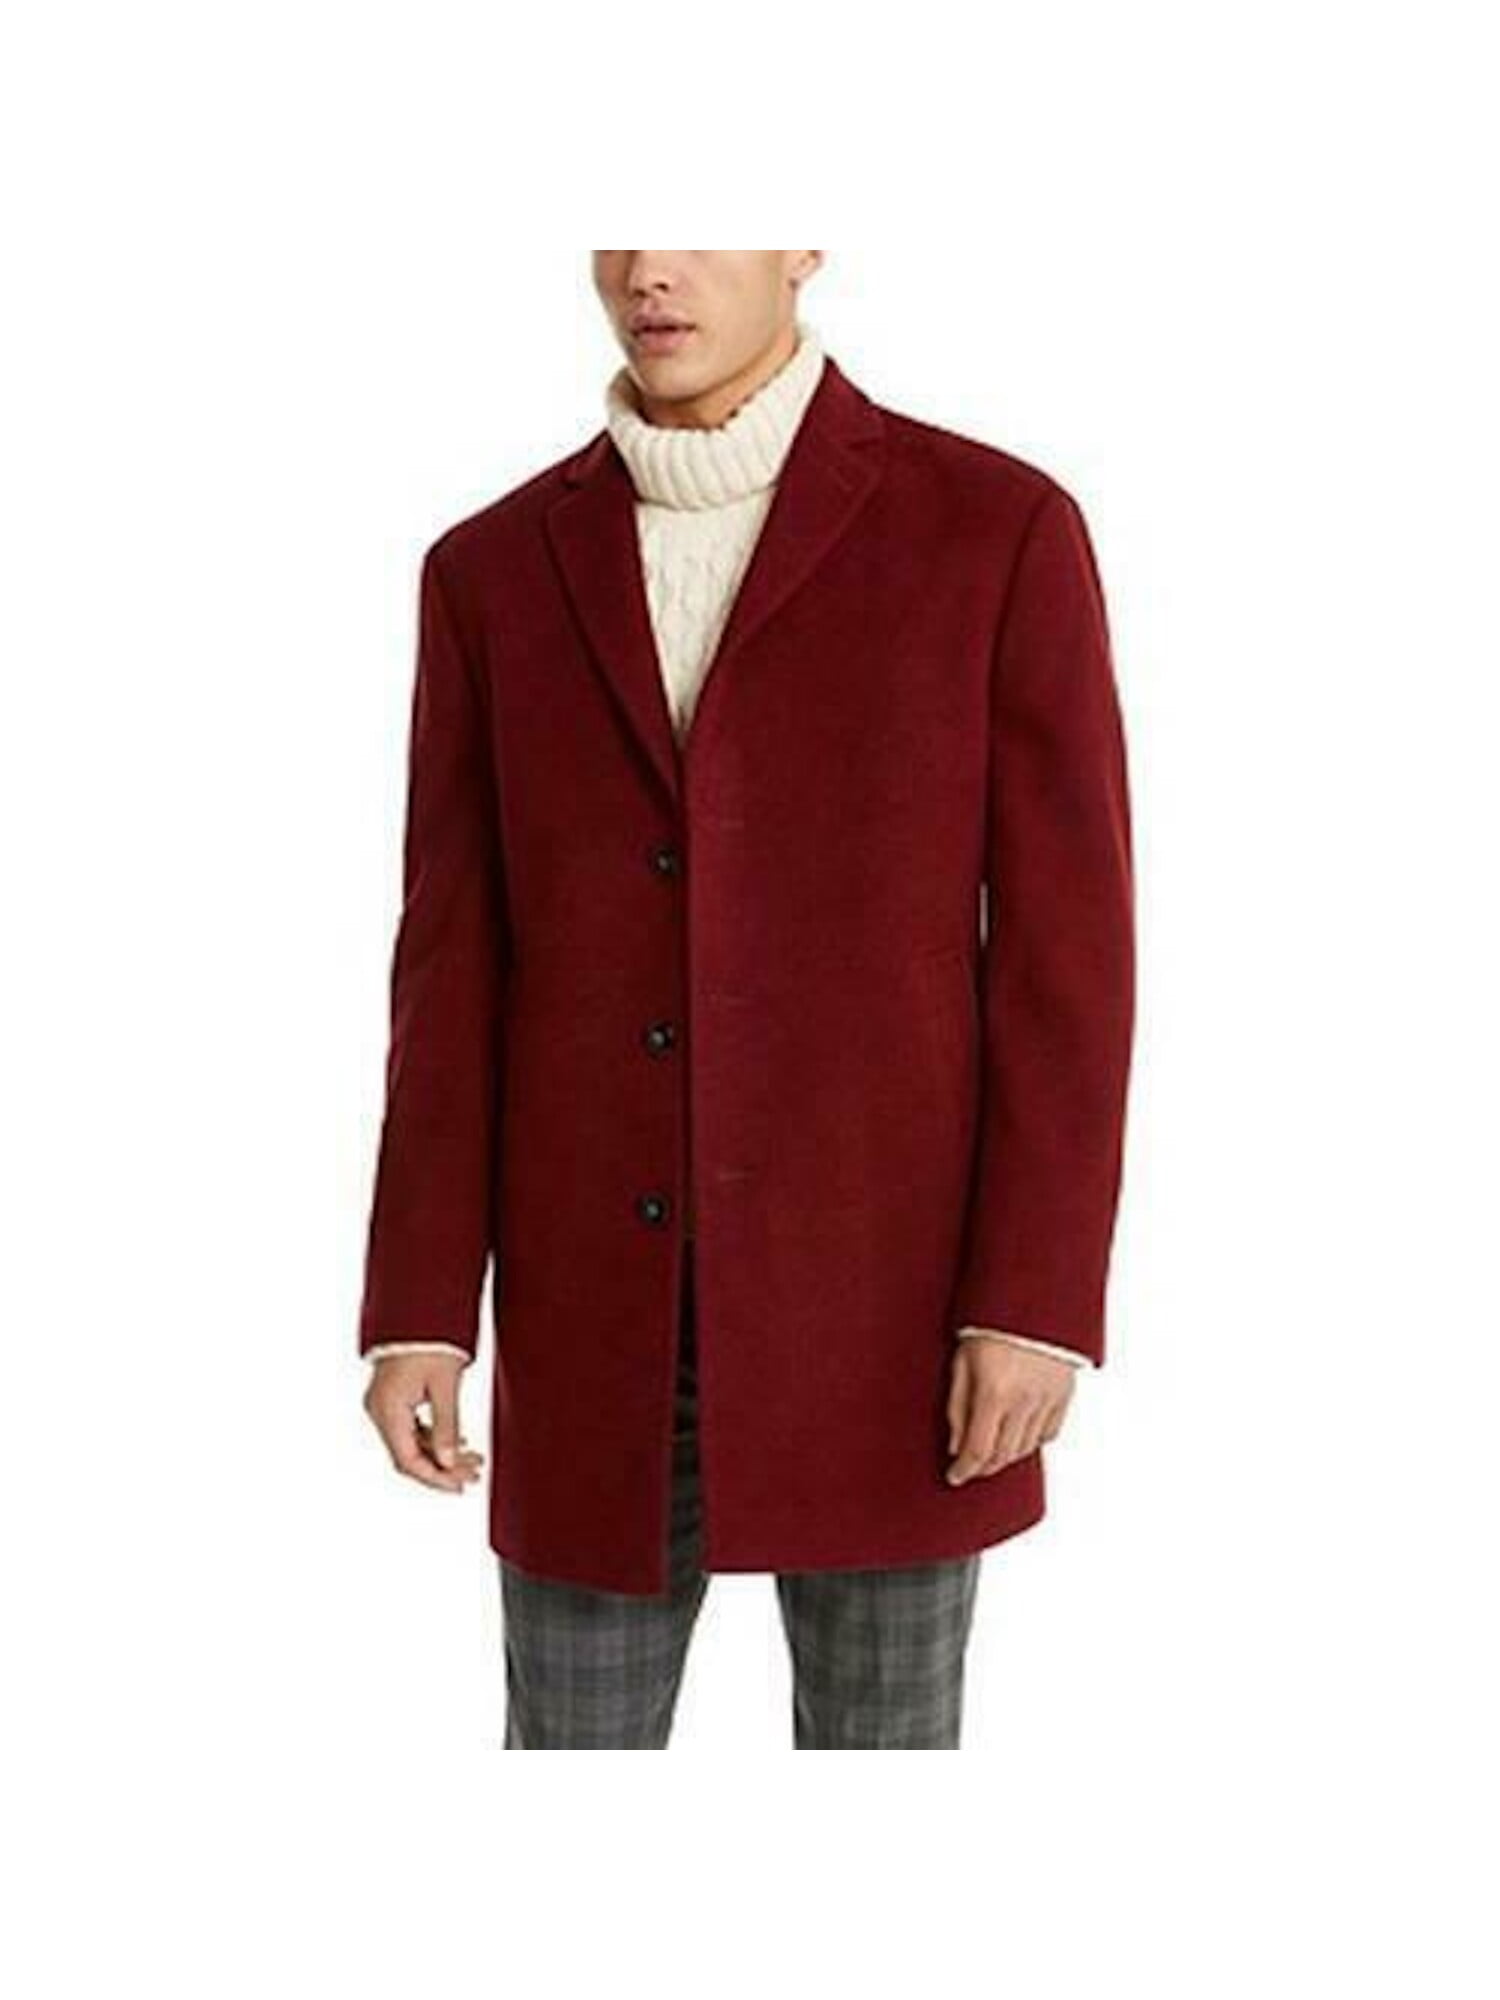 CALVIN KLEIN Mens Red Single Breasted, Wool Blend Button Down Coat 46R -  